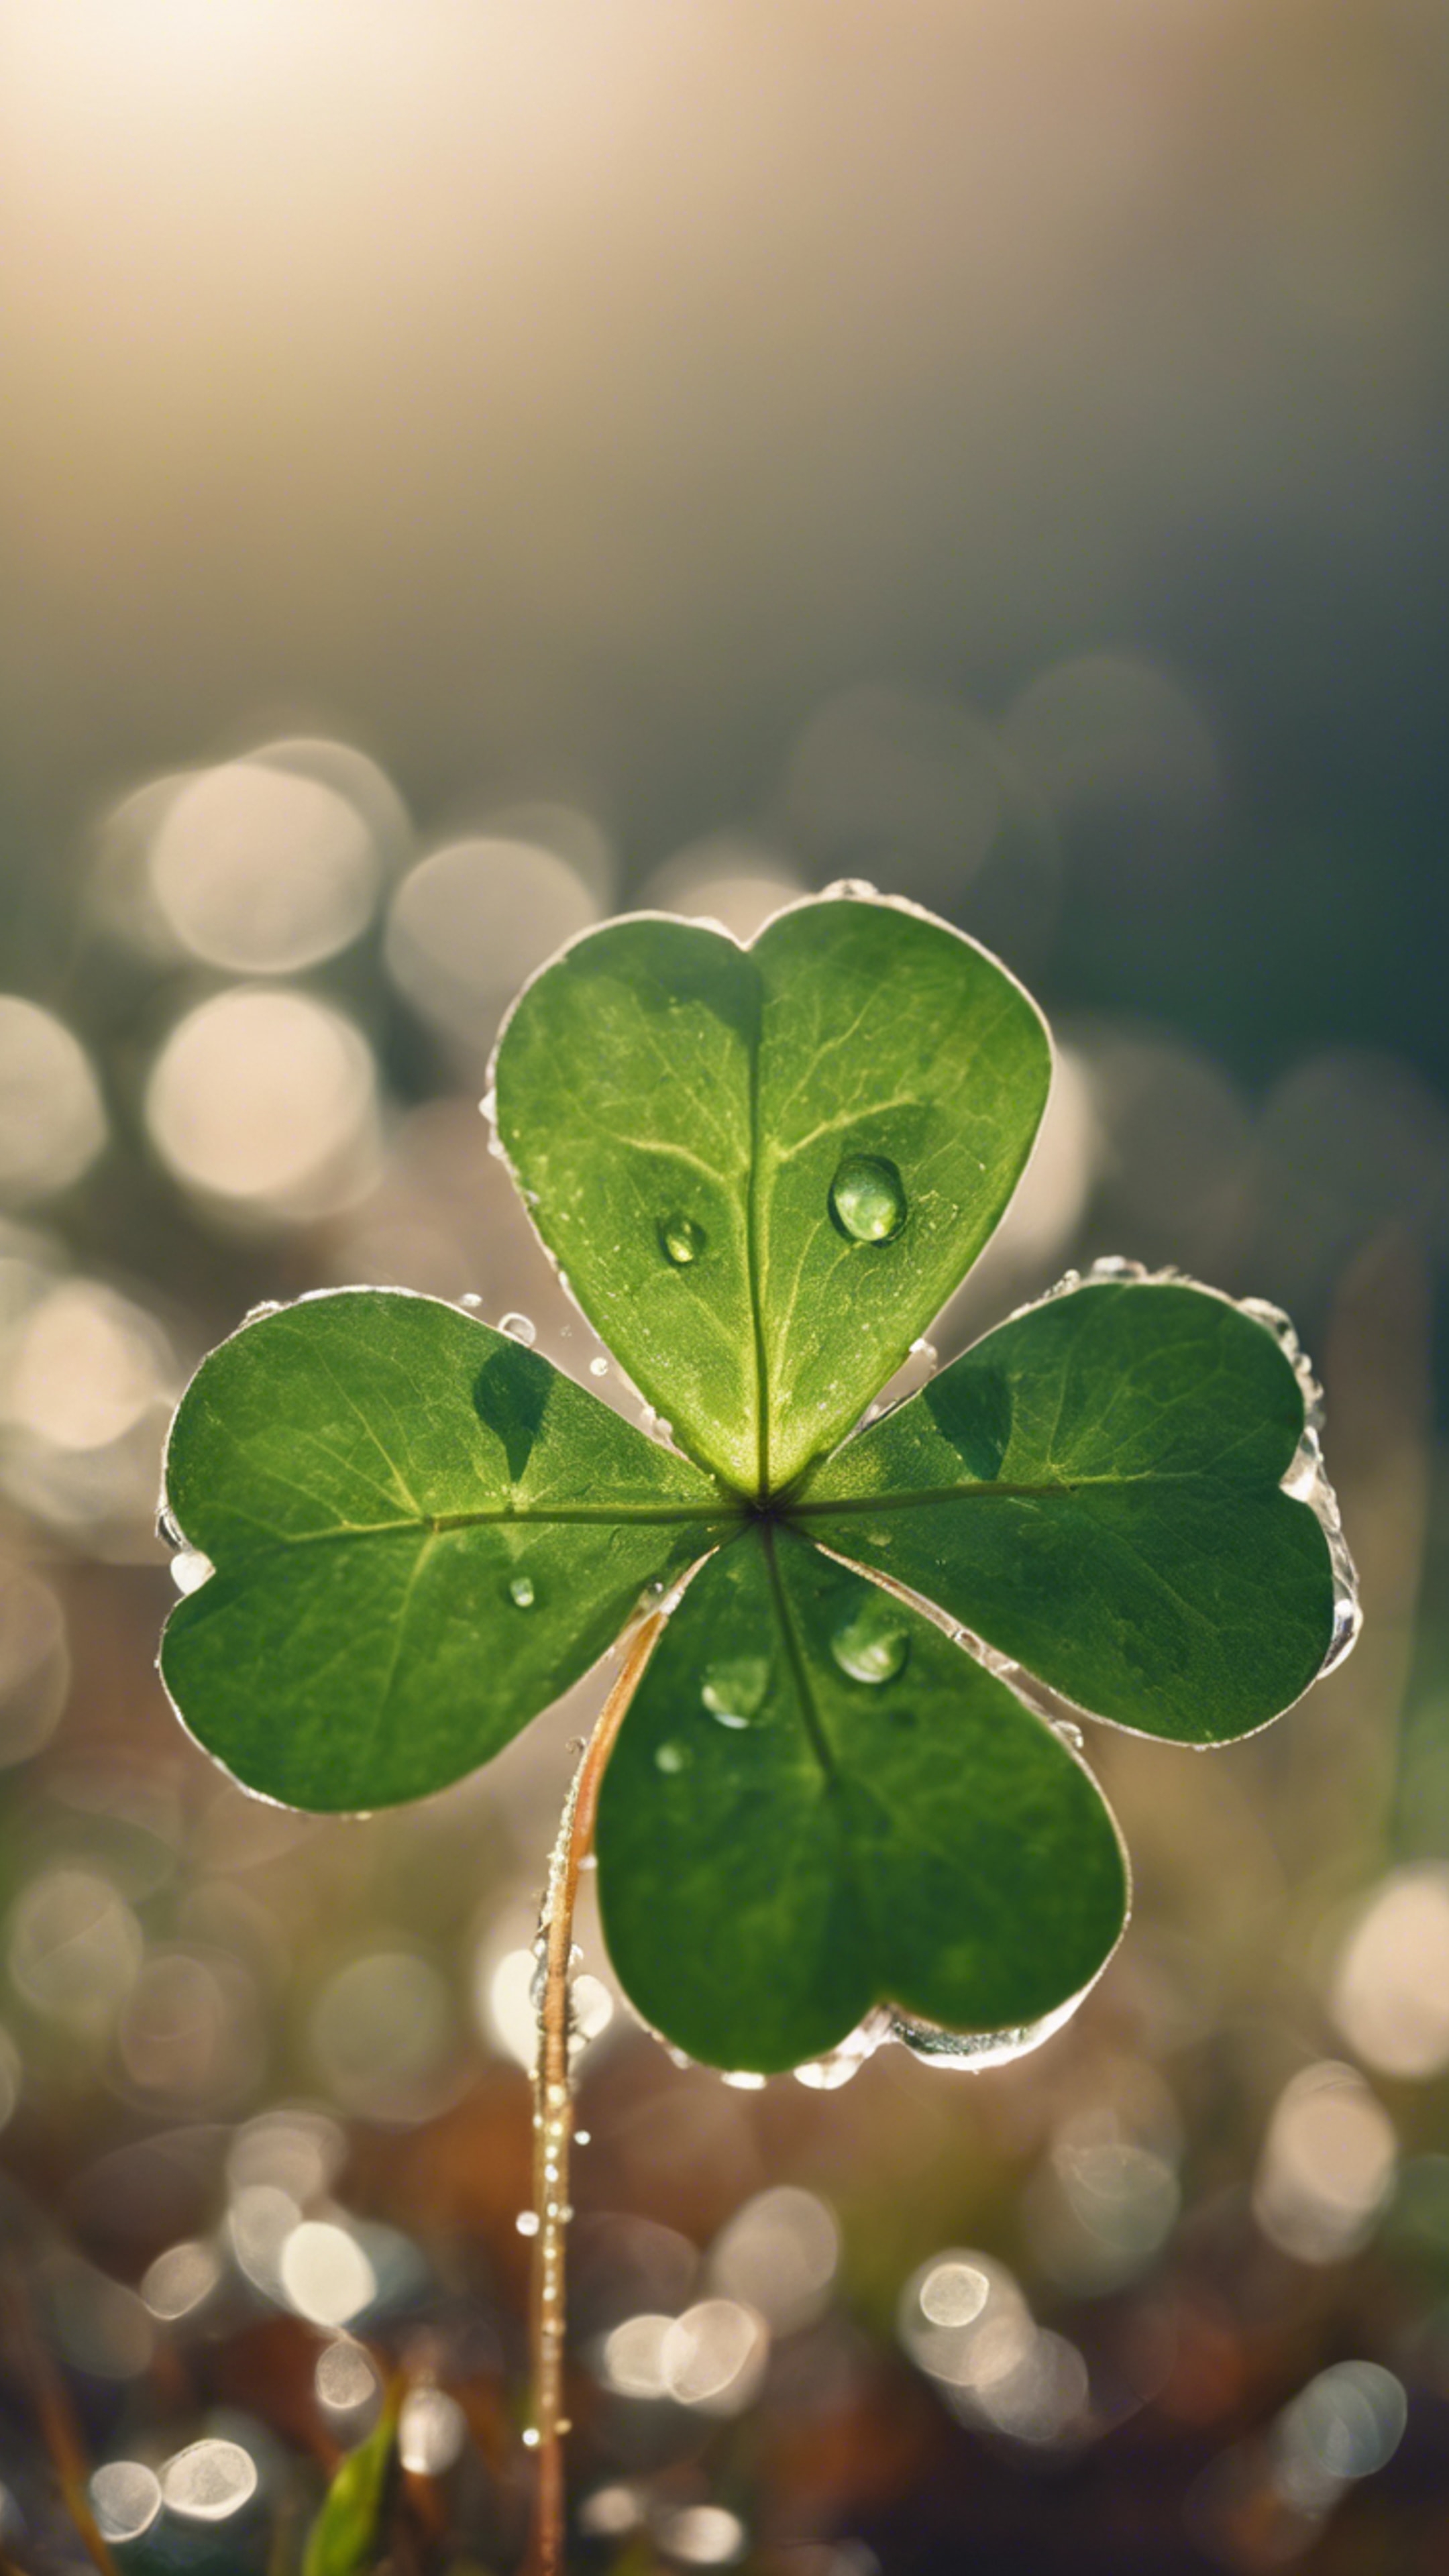 A close-up view of a four leaf clover gleaming in the morning dew. Tapet[b8d84a1222284df192e8]